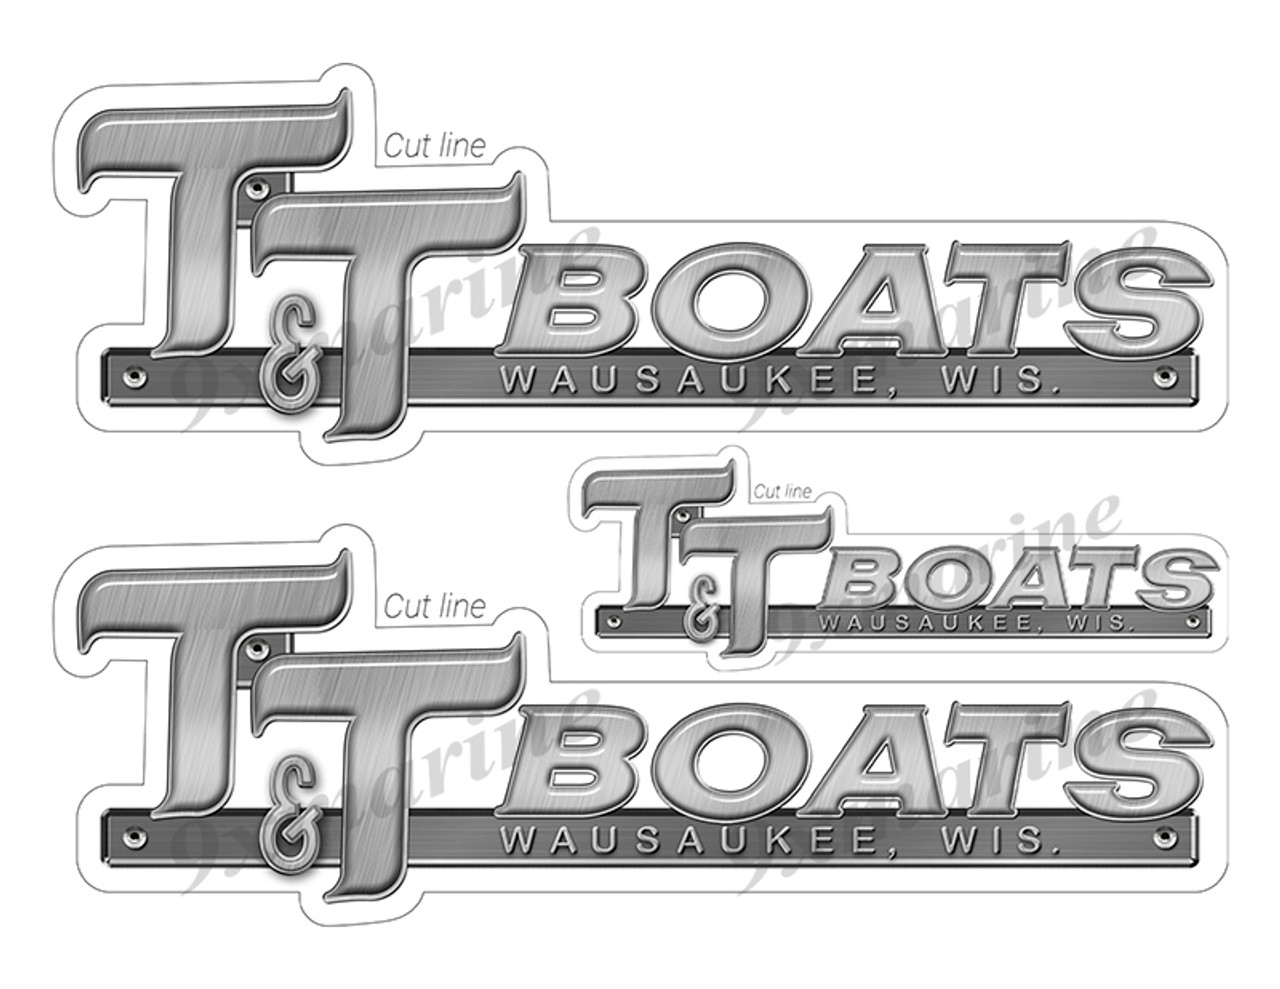 Three T&T Boat Vintage Stickers. Brushed Metal Style